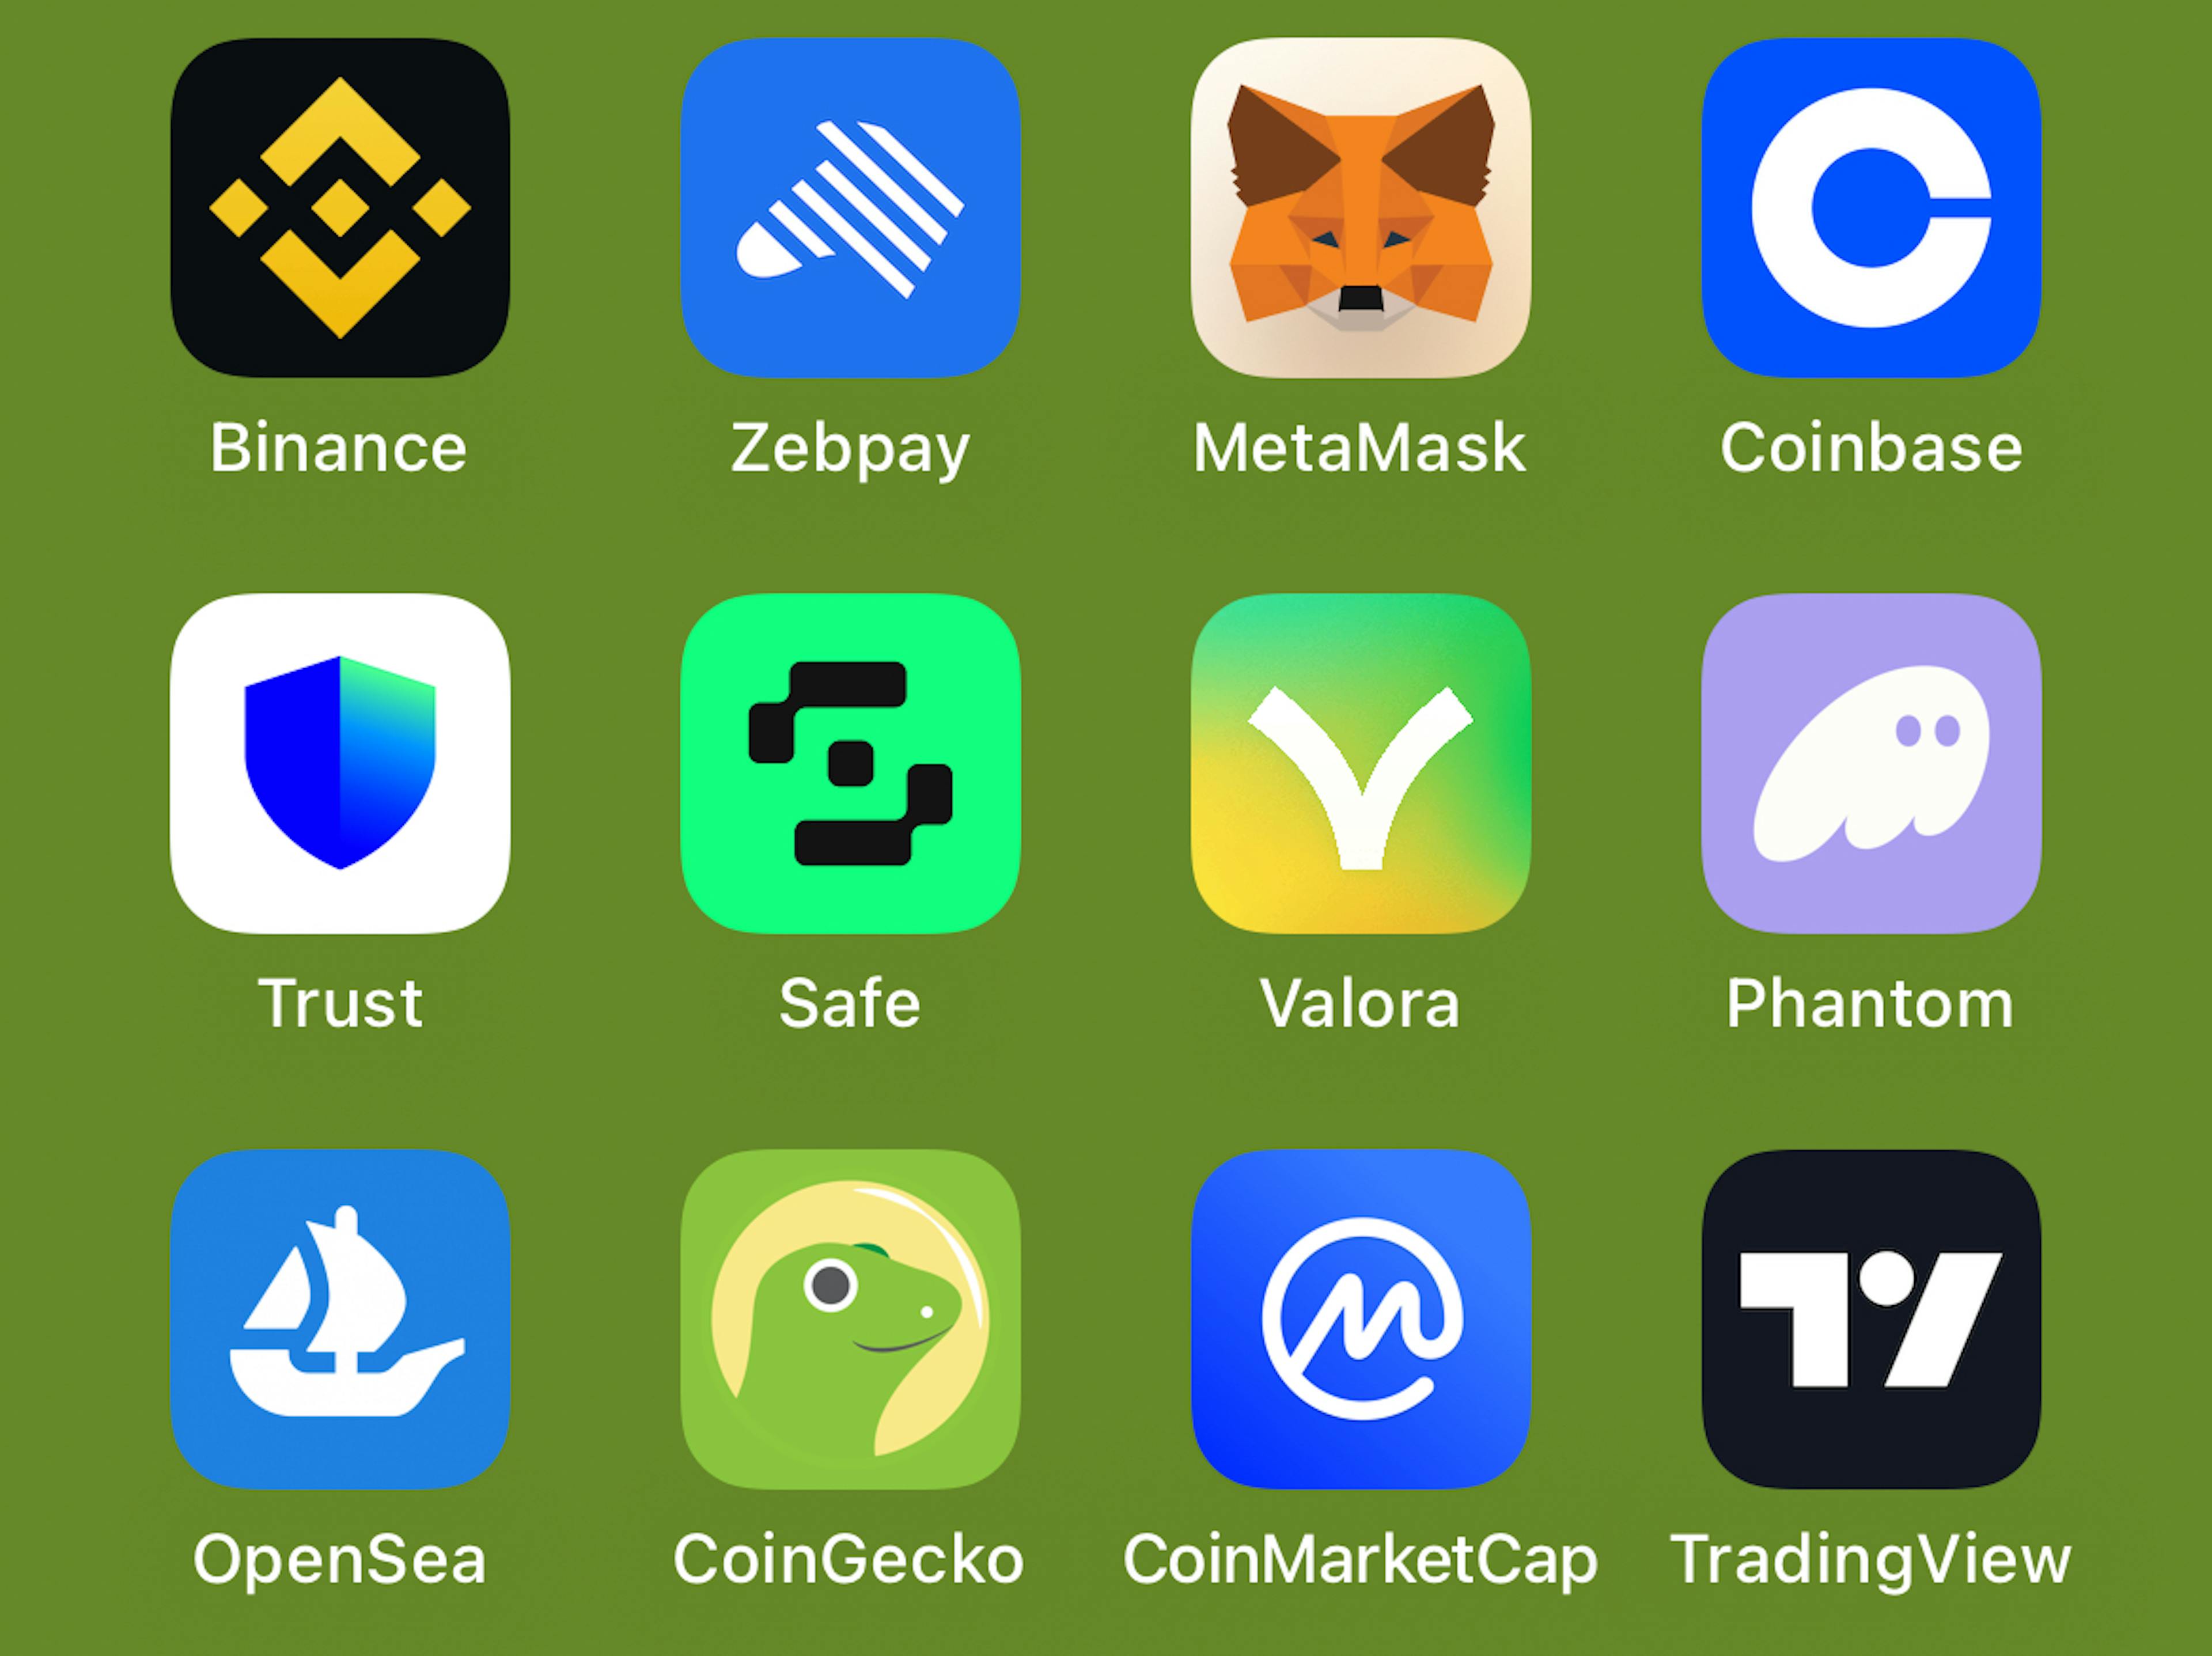 Personal Preference in Crypto Products